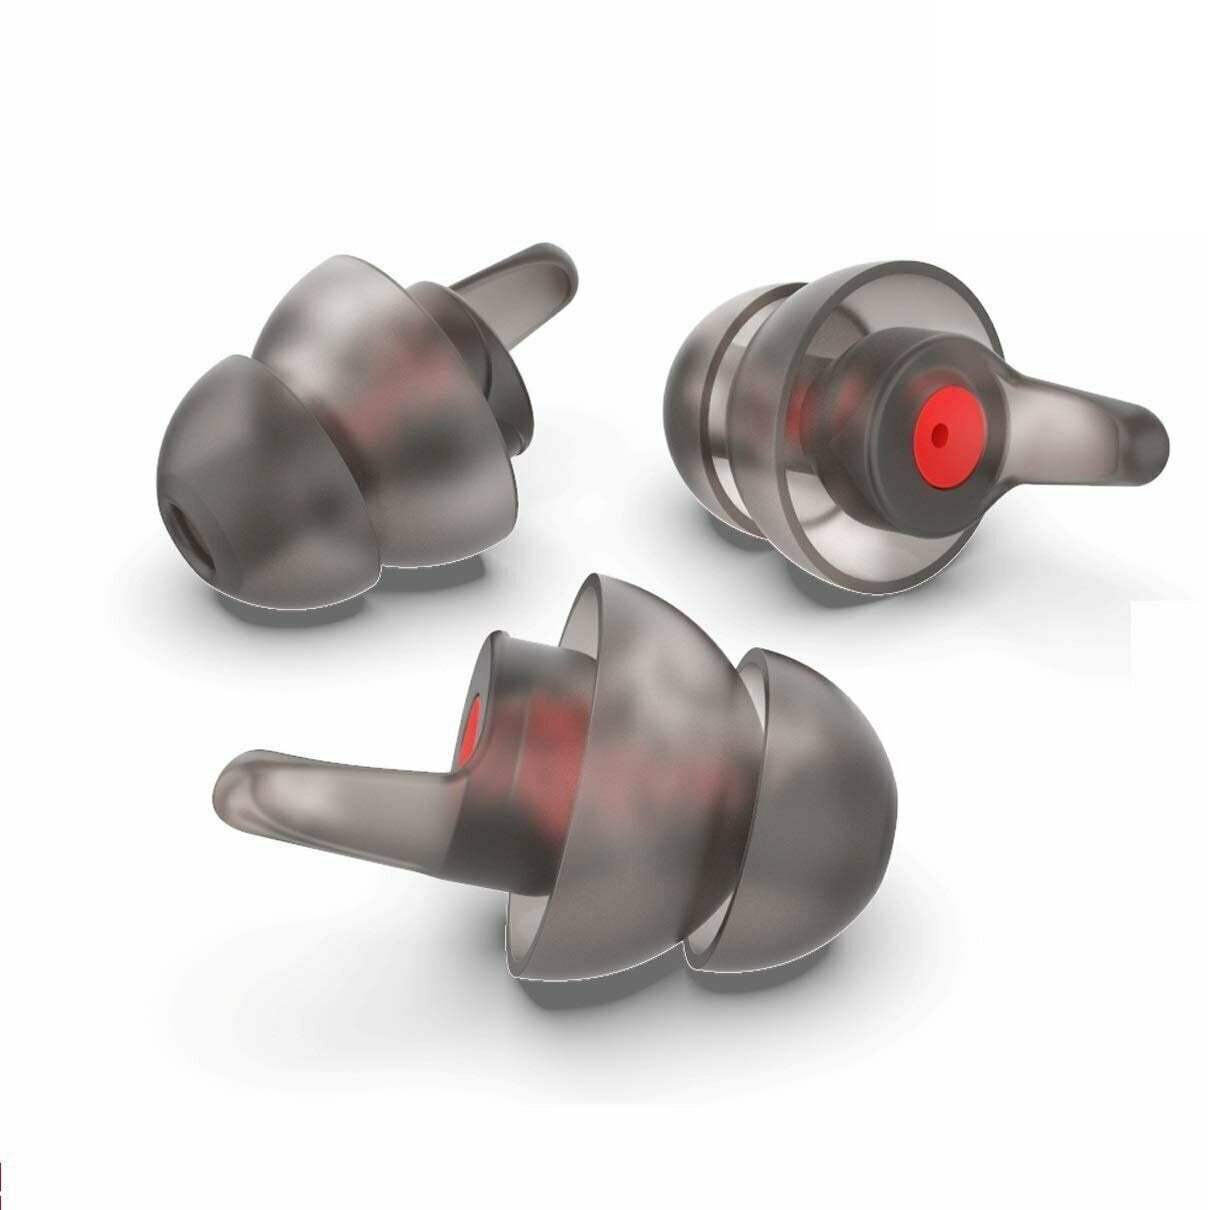 EarPeace Motorcycle Ear Plugs - Noise Reduction and High Fidelity